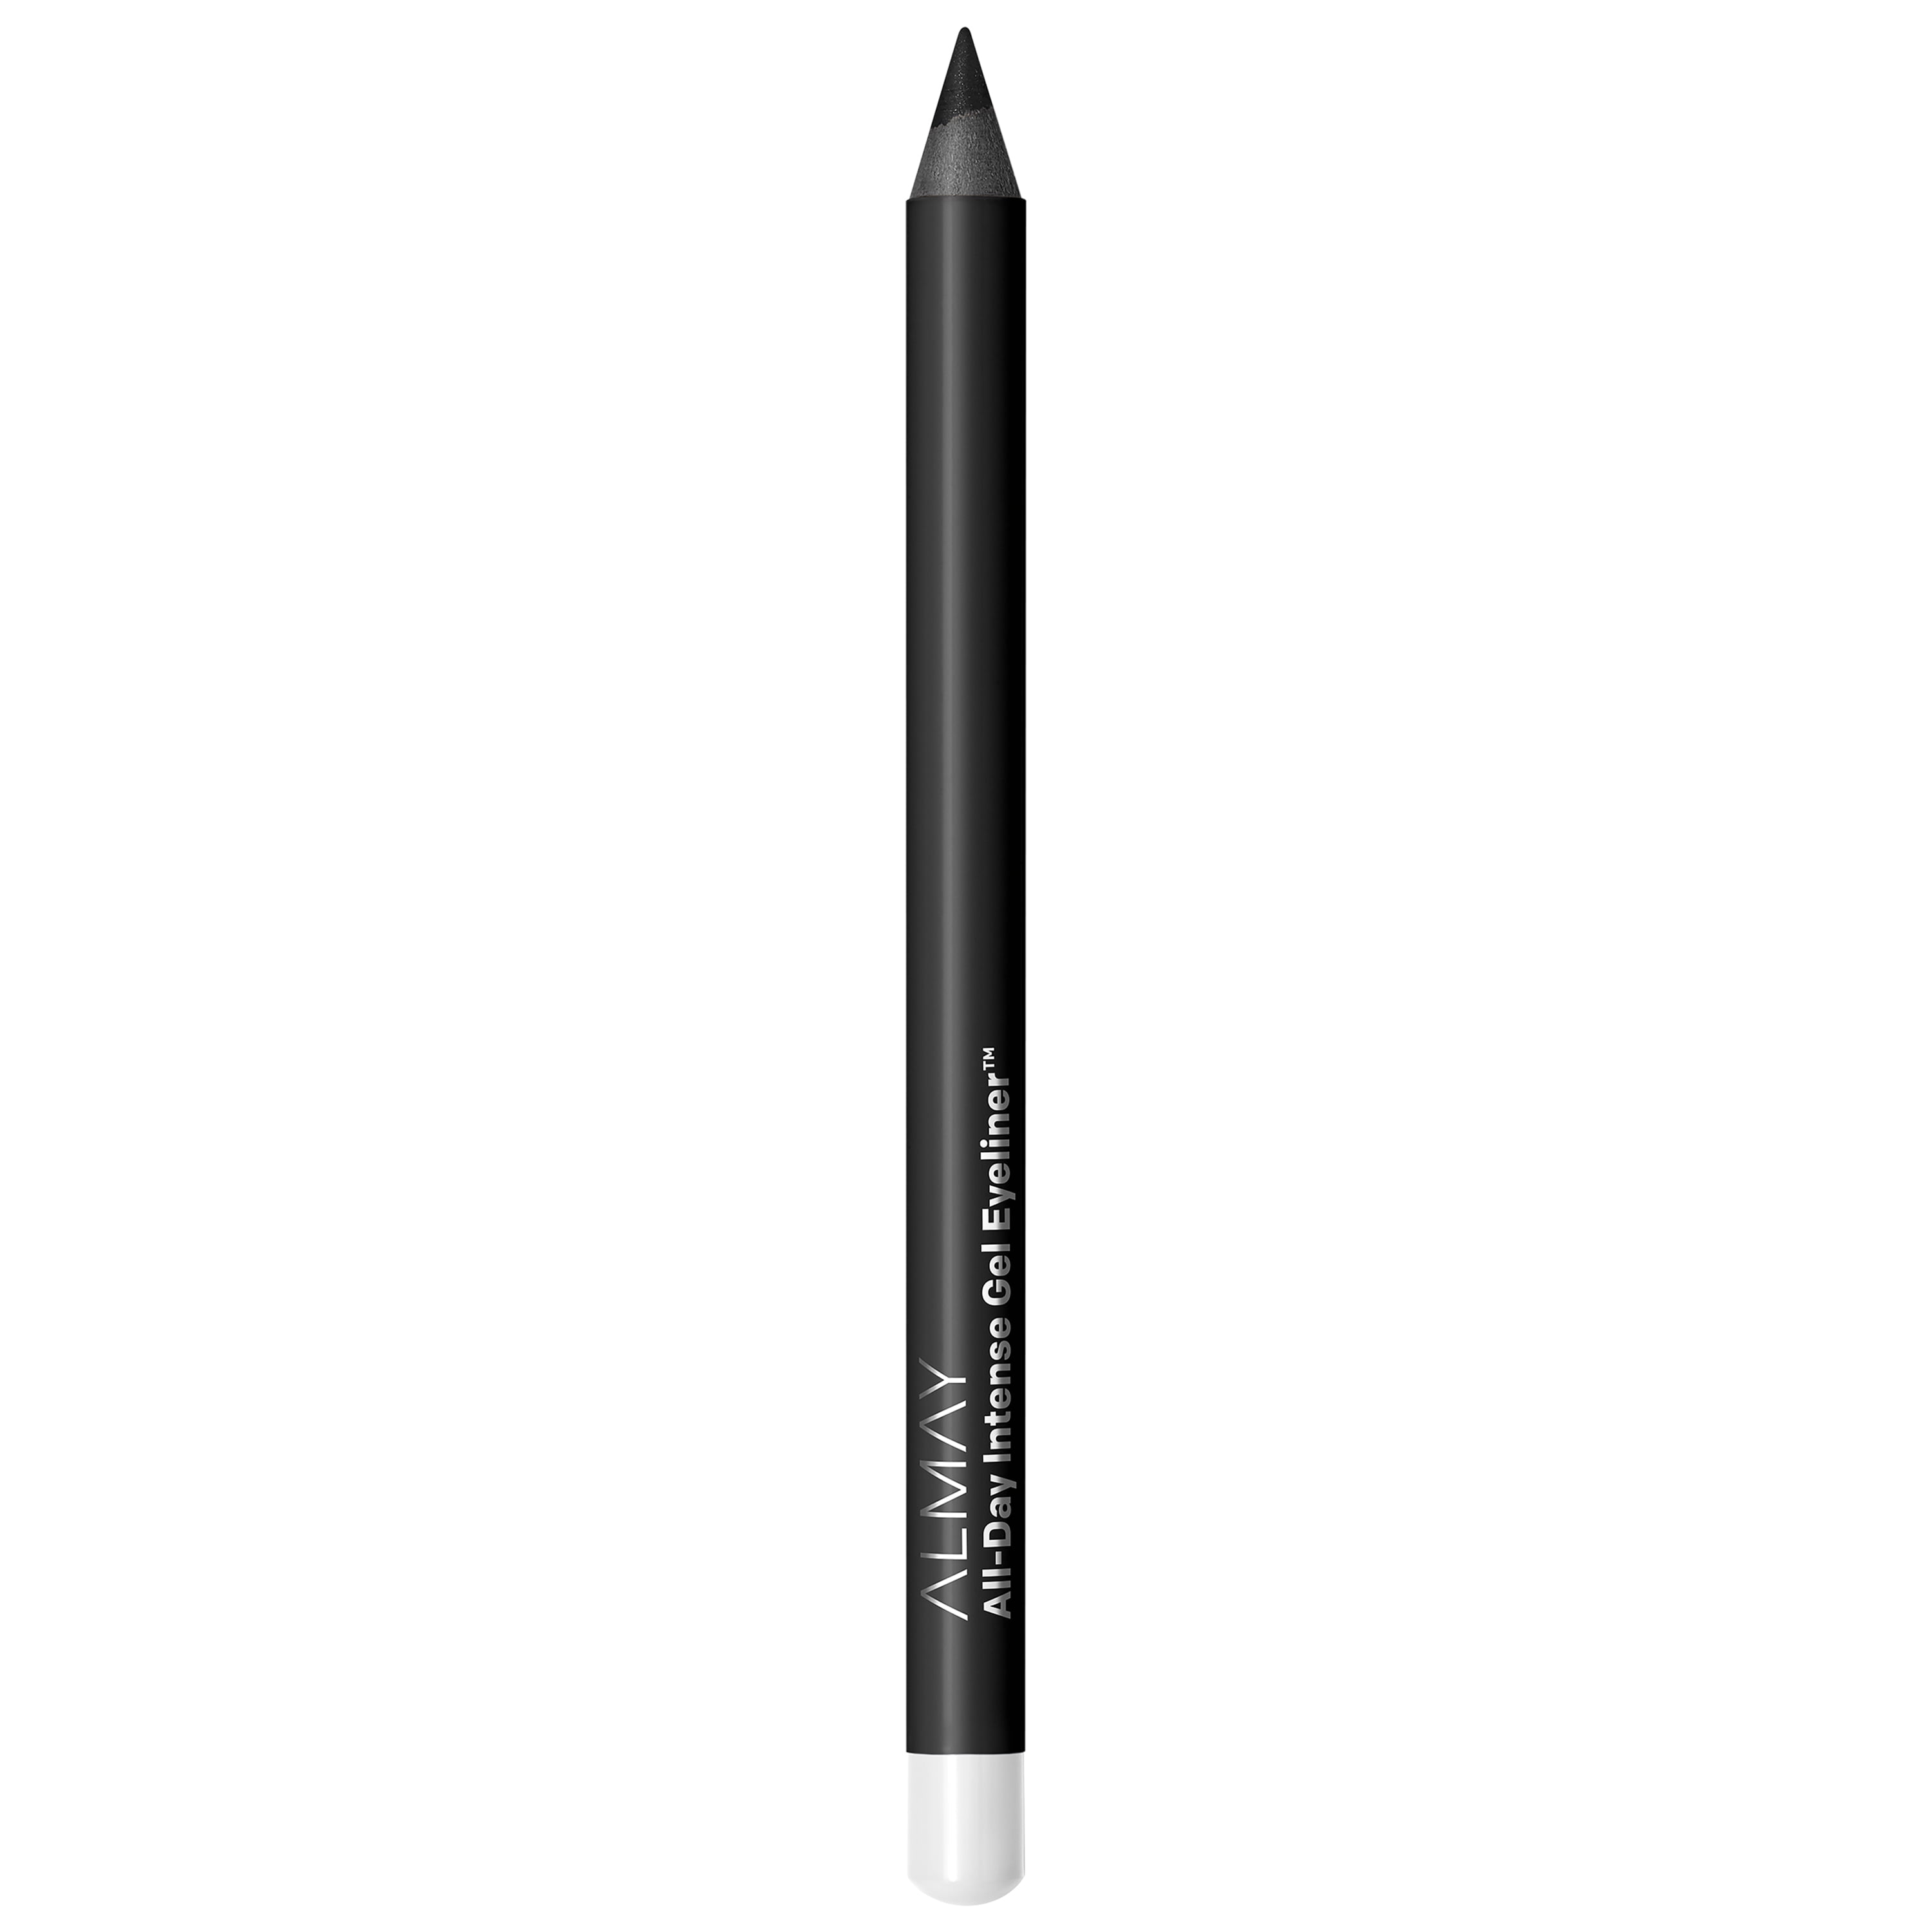 Almay All-Day Intense Gel Eyeliner, Longlasting, Waterproof, Fade-Proof Creamy High-Performing Easy-to-Sharpen Liner Pencil, 110 Rich Black, 0.028 oz.